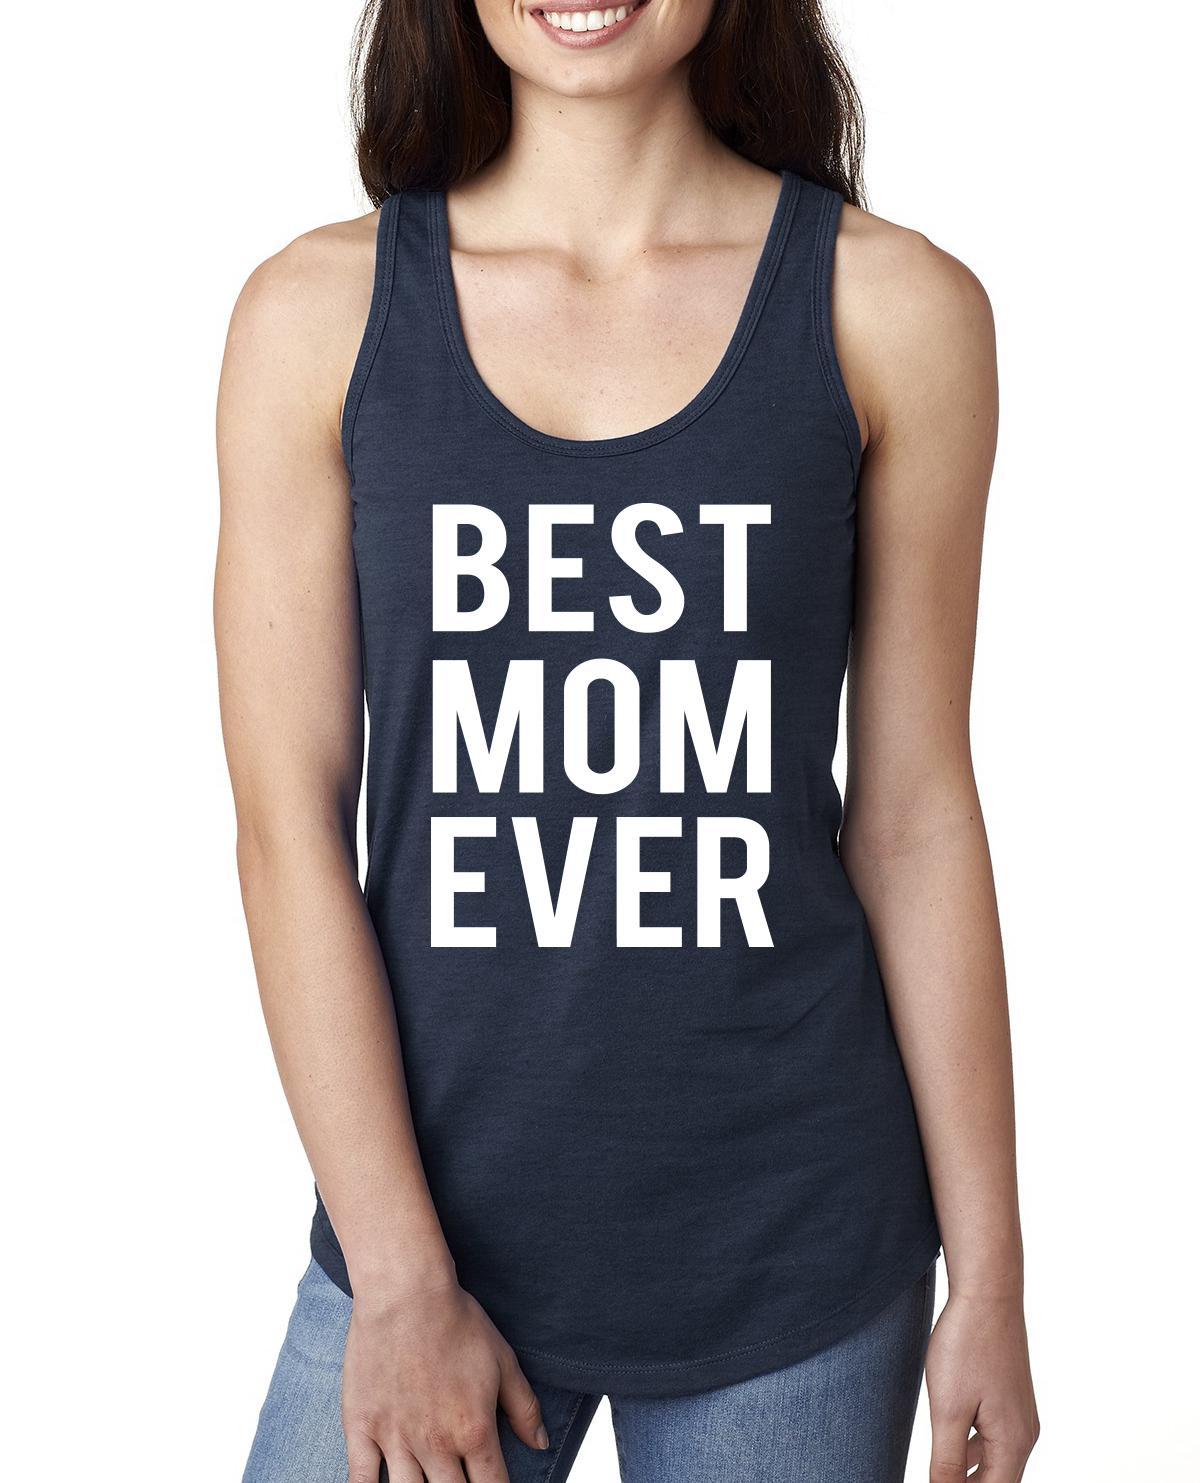 Wild Bobby, Best Mom Ever Mothers Day Gift, Mother's Day, Women Racerback Tank Top, Navy, Large - image 1 of 3